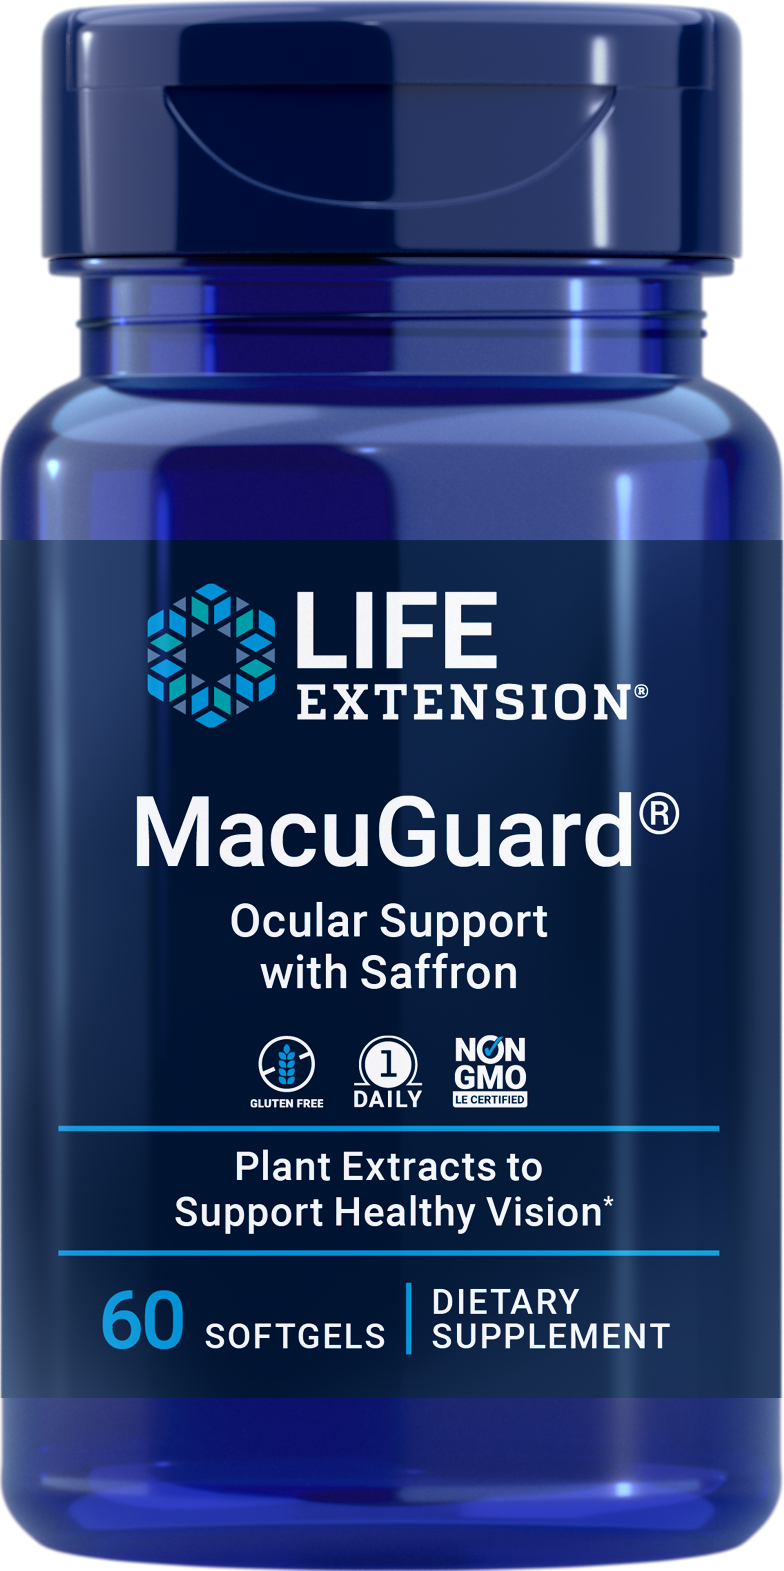 Life Extension MacuGuard Ocular Support with Saffron 60Softgels